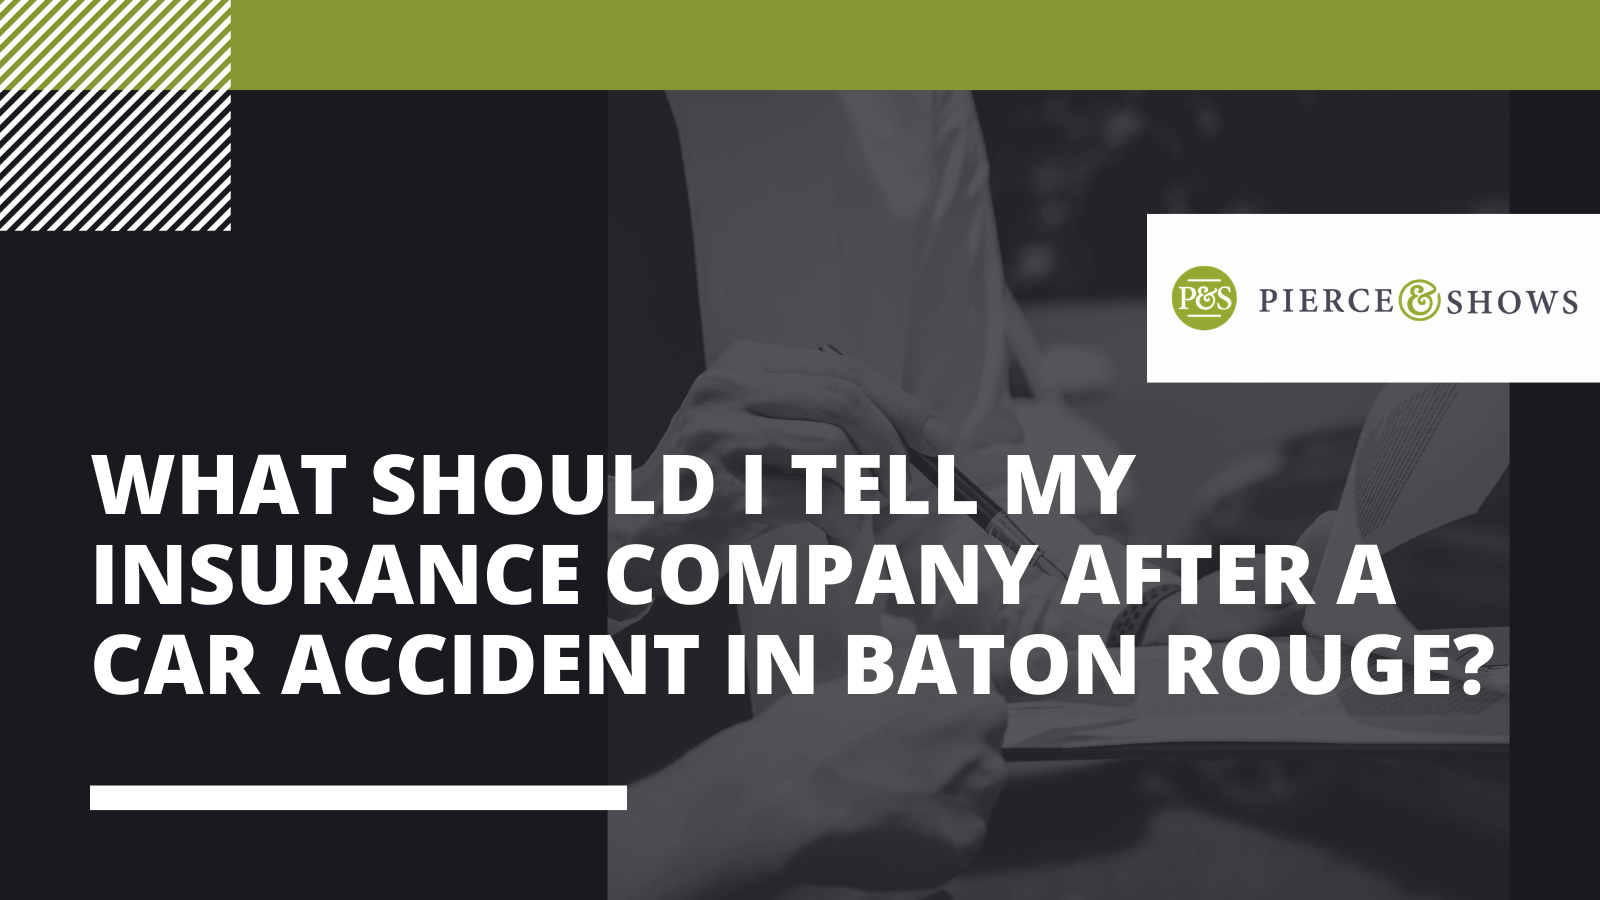 What should I tell my insurance company after a car accident in Baton Rouge? - Pierce & Shows injury attorney Baton Rouge, Louisiana